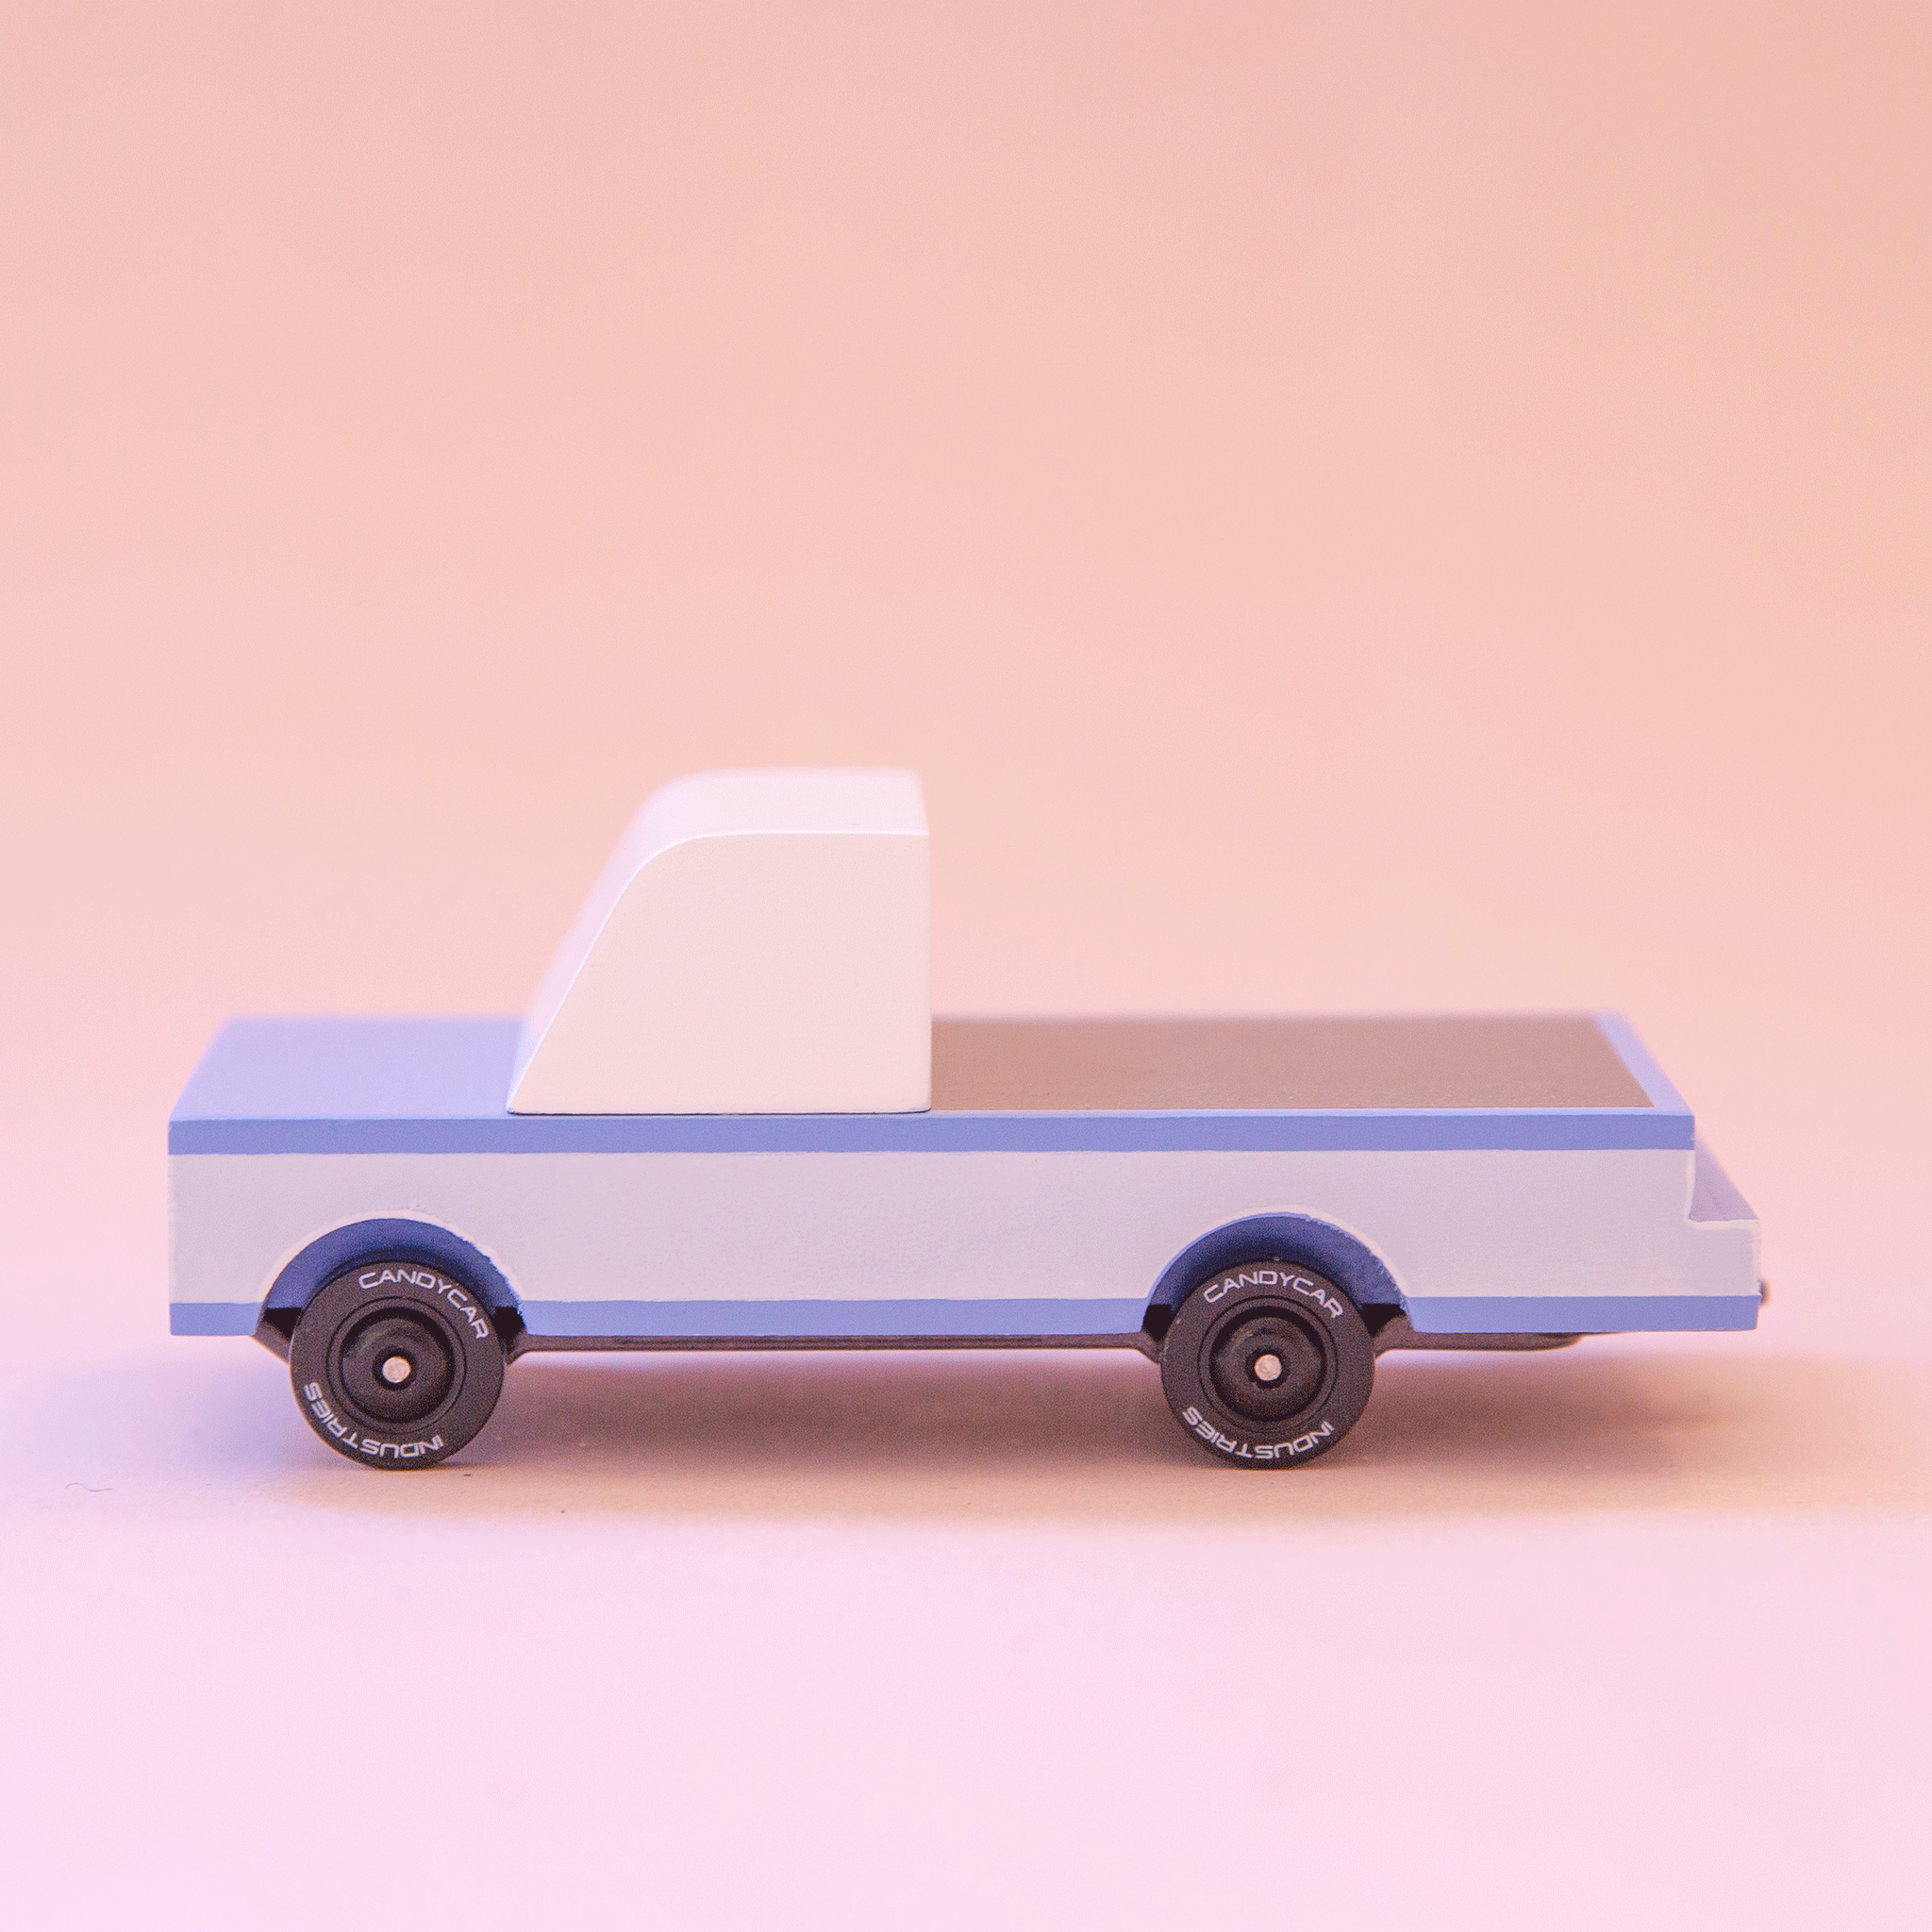 A blue wooden toy pickup truck on a peachy background.